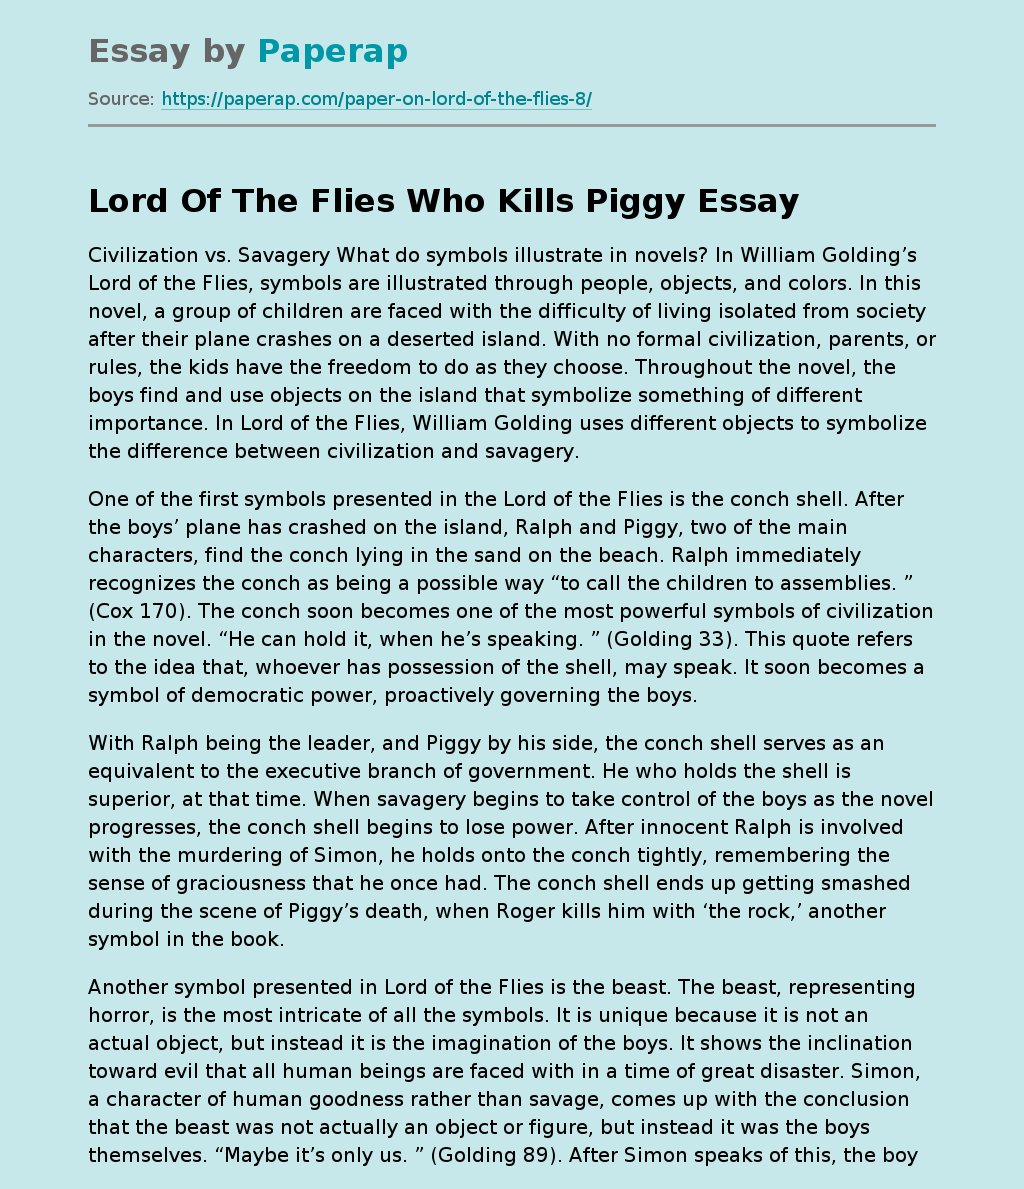 Lord Of The Flies Who Kills Piggy